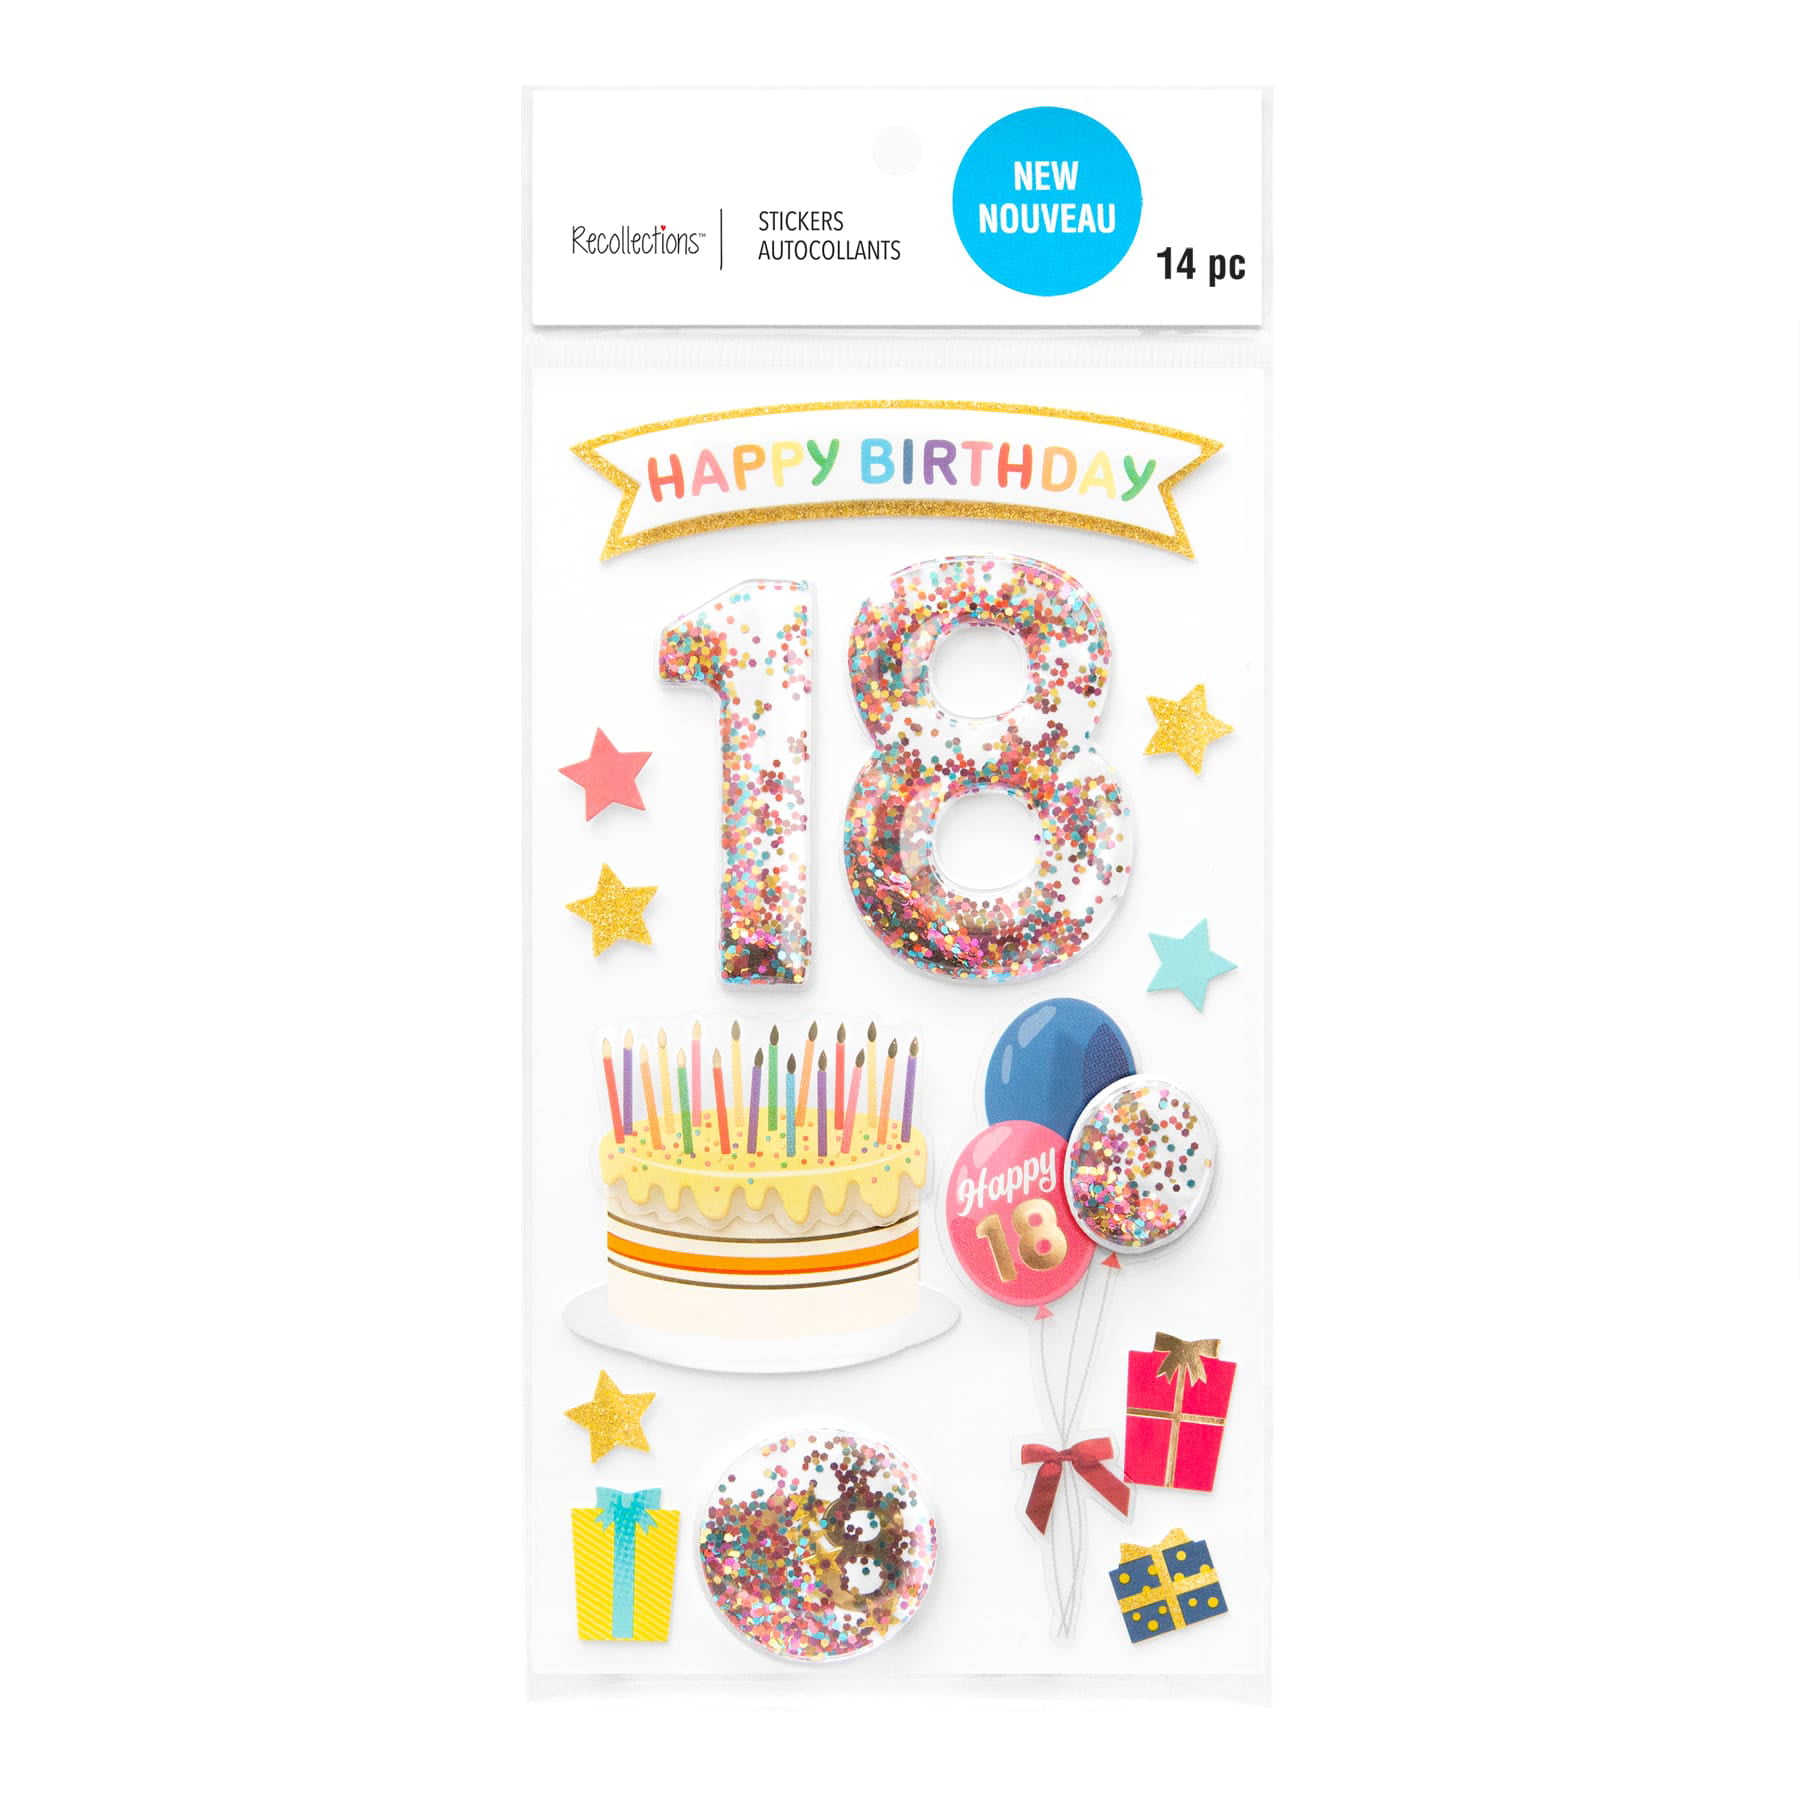 53pcs Happy Birthday Stickers Birthday Party Stickers for Kids Adults Party School Supplies Calendar Birthday Card